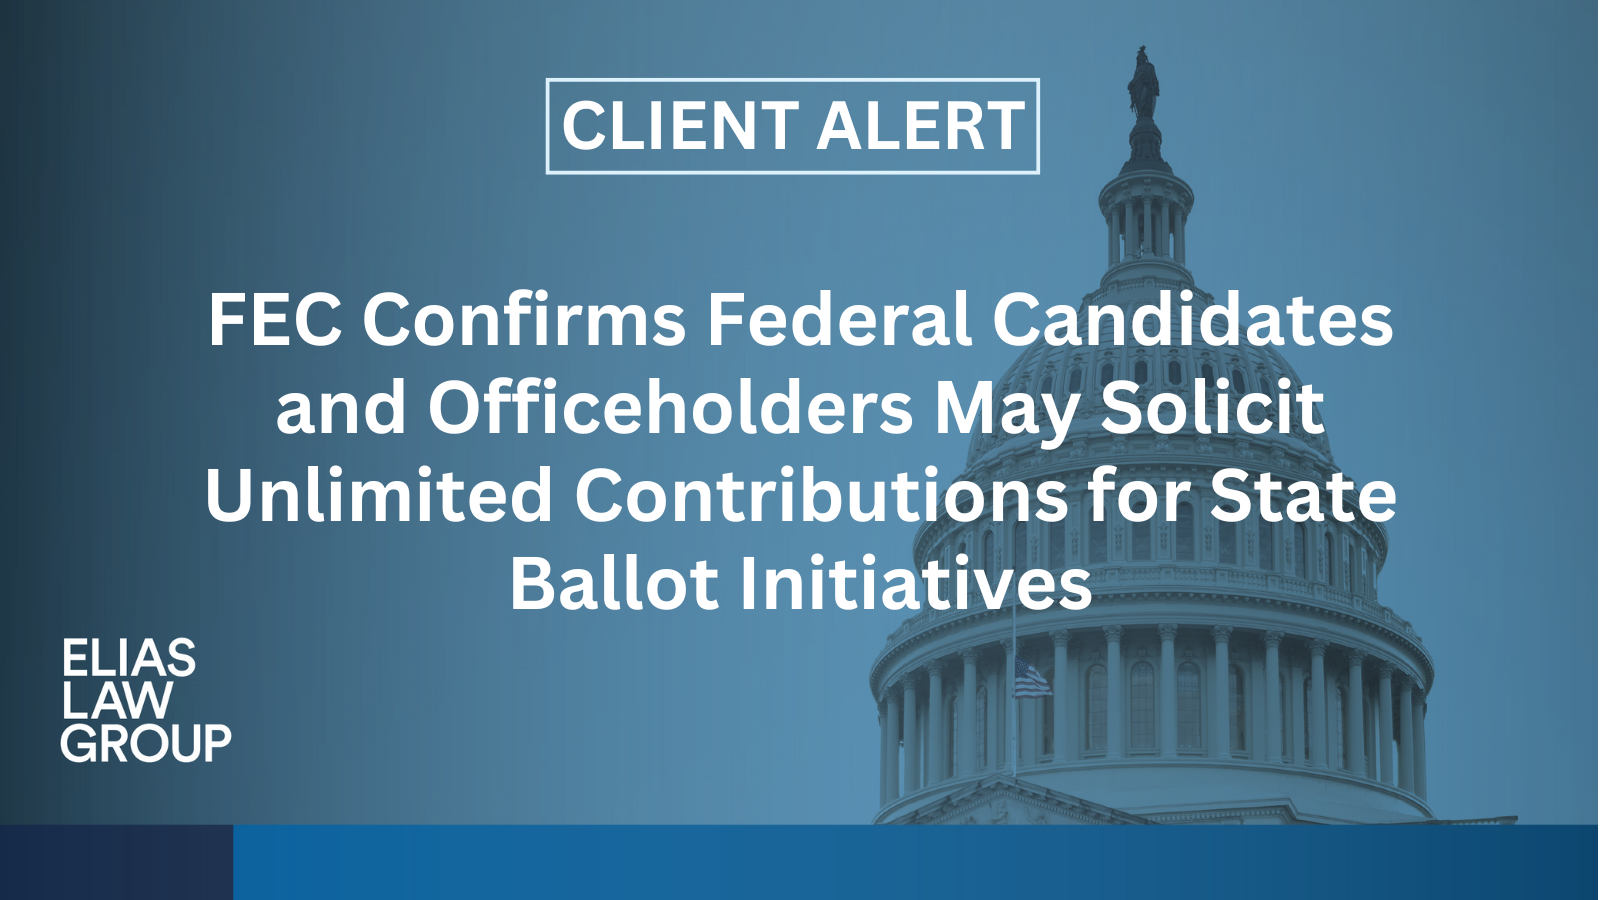 FEC Confirms Federal Candidates and Officeholders May Solicit Unlimited Contributions for State Ballot Initiatives